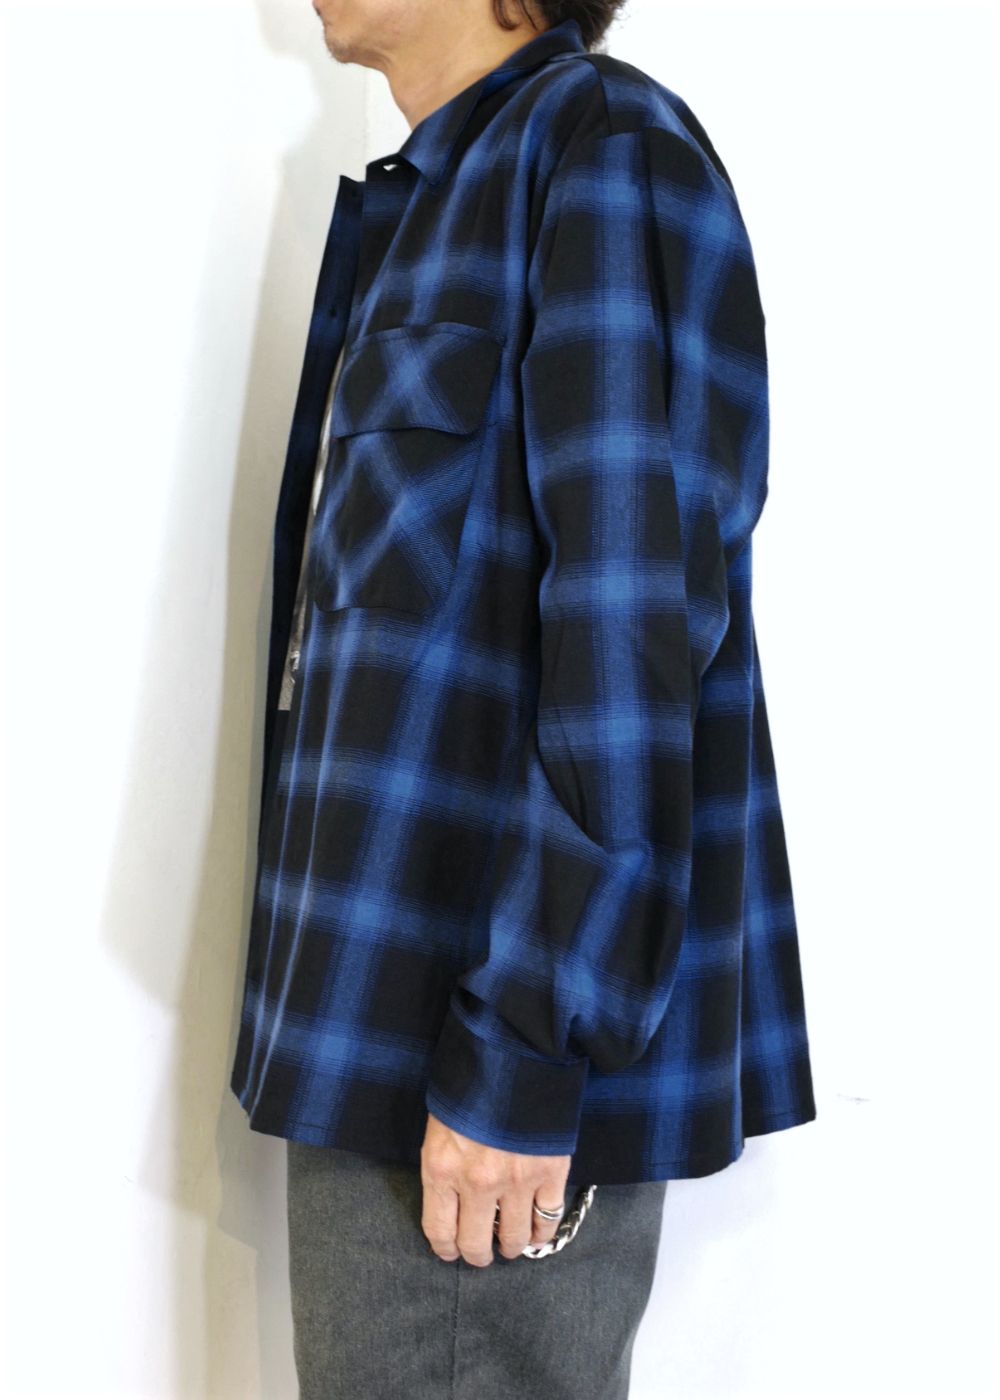 HIDE AND SEEK - OMBRE CHECK L/S SHIRT (BLUE) / オンブレチェック